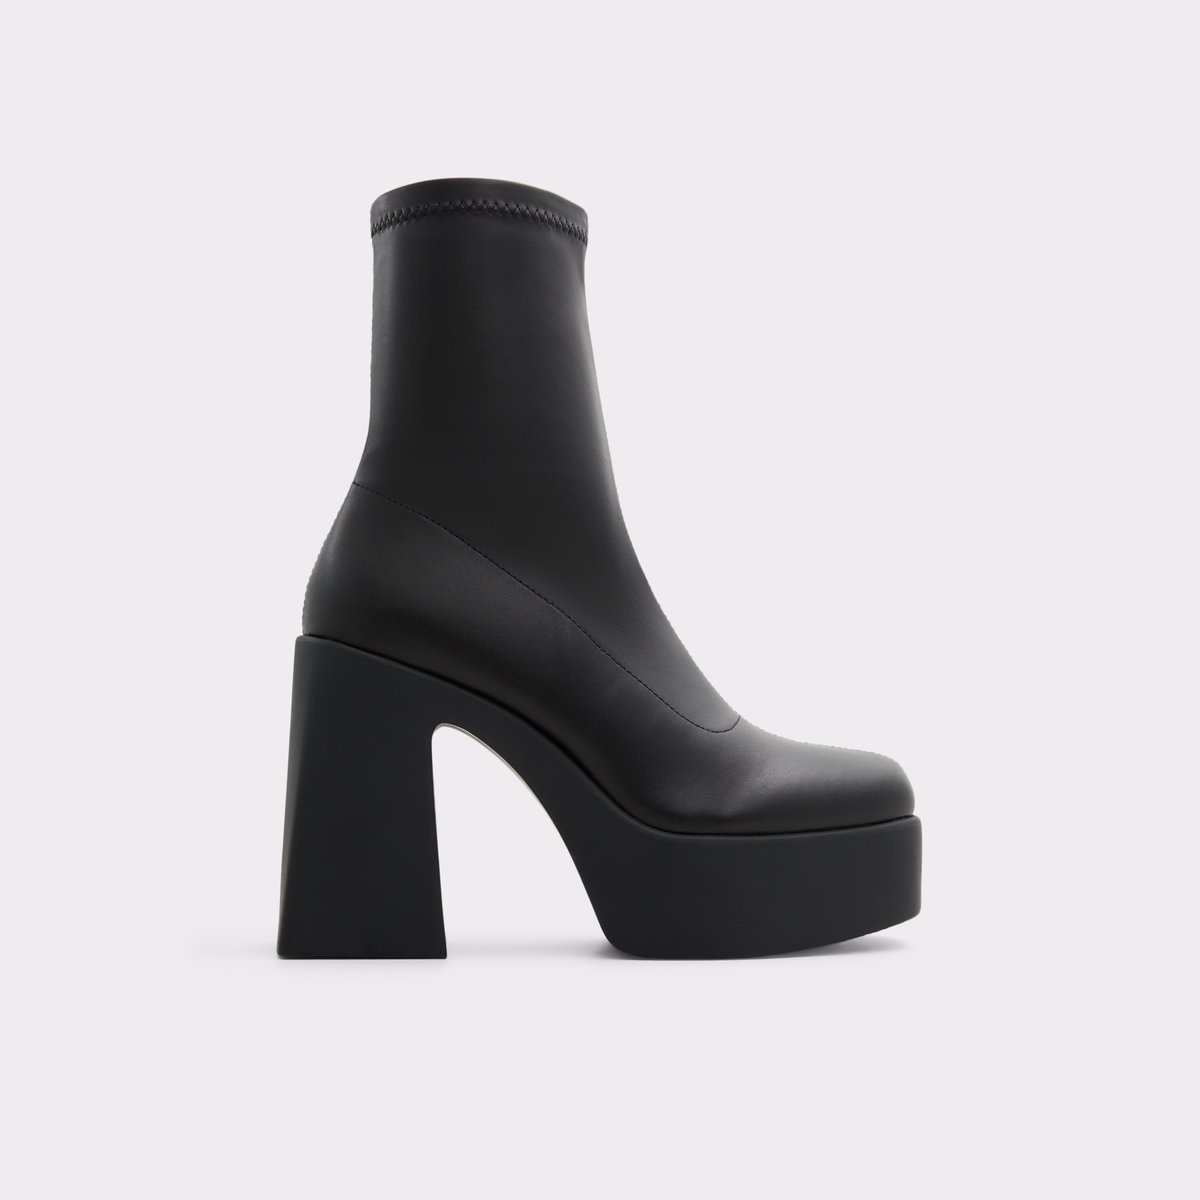 Grandstep Black Synthetic Stretch Women's Ankle boots | ALDO US